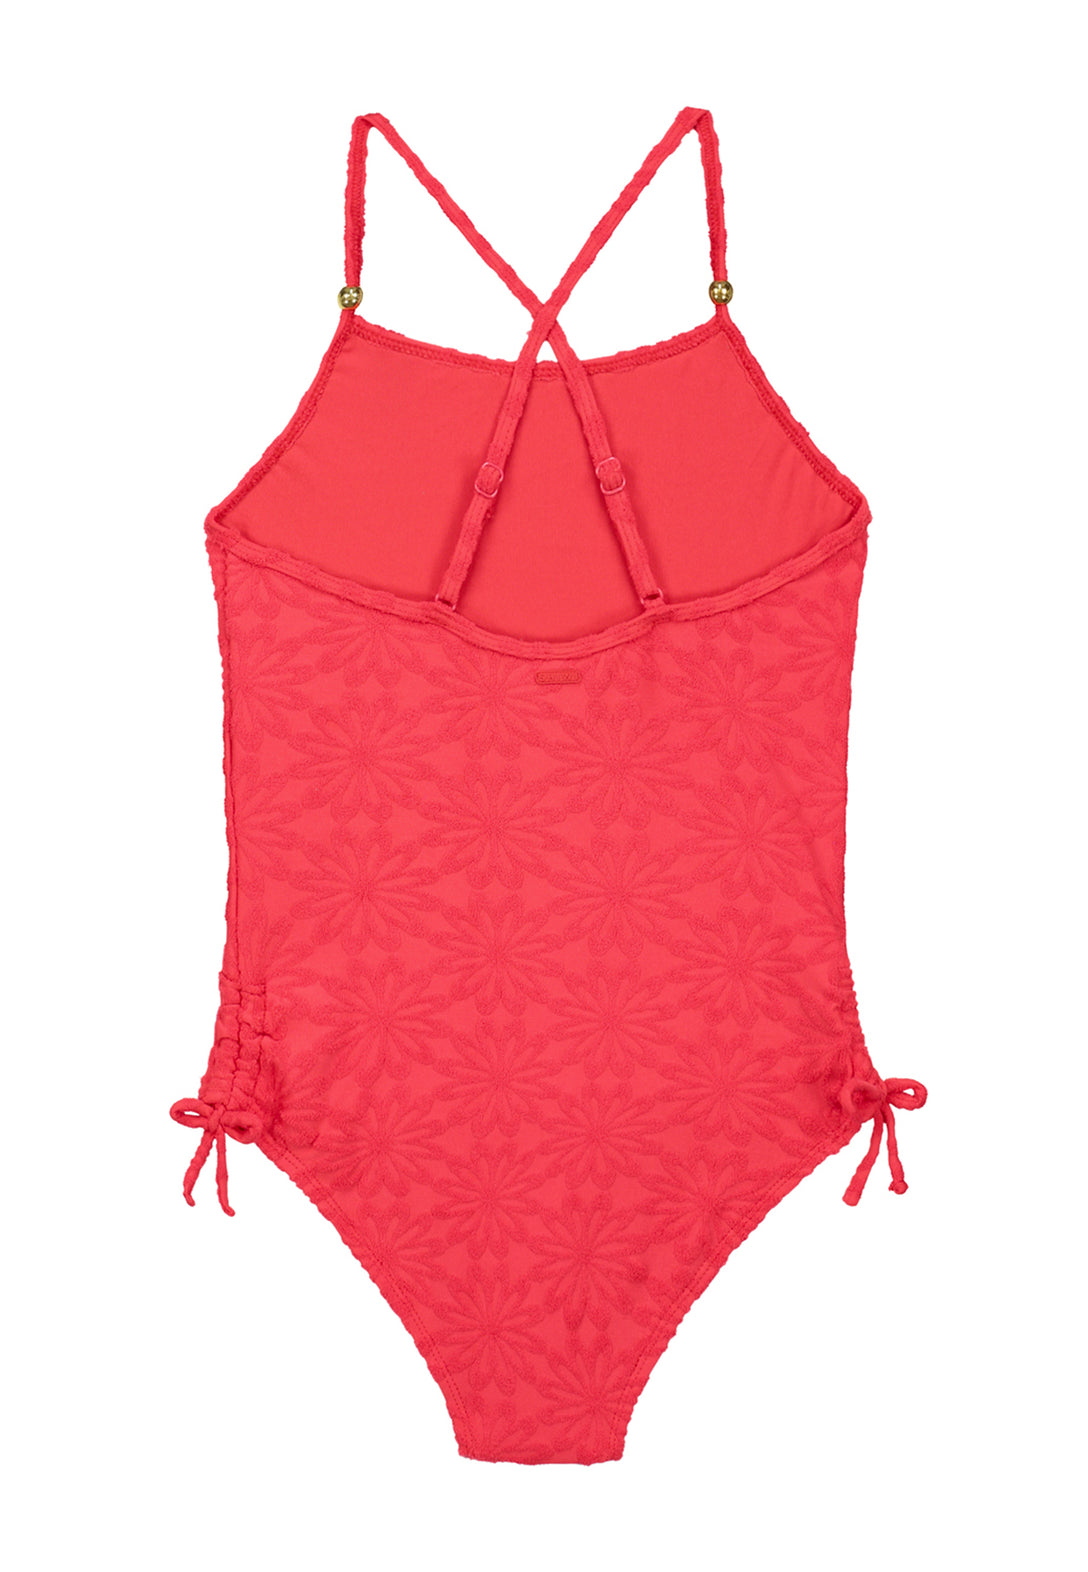 Girls LOIS swimsuit daisy structure